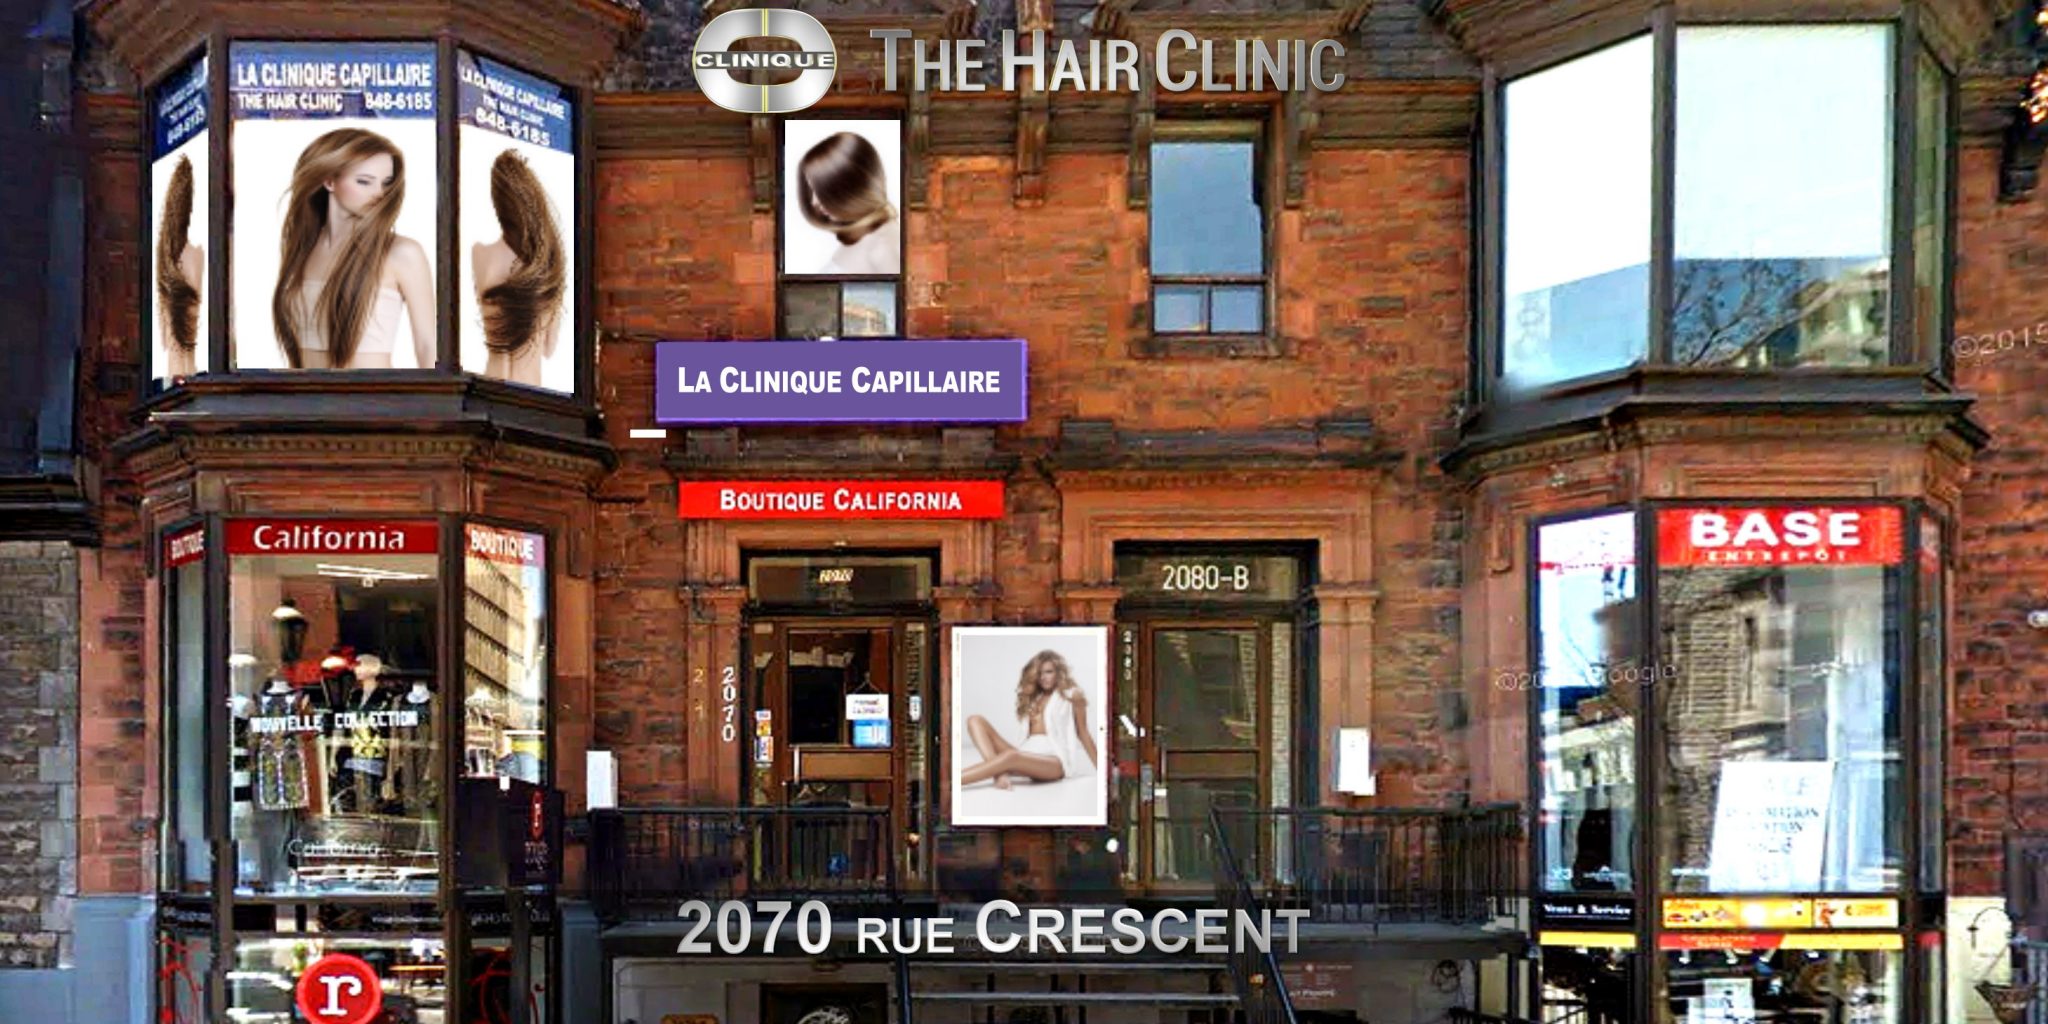 Contact The Hair Clinic Montreal 2070 Crescent at 514-848-6185